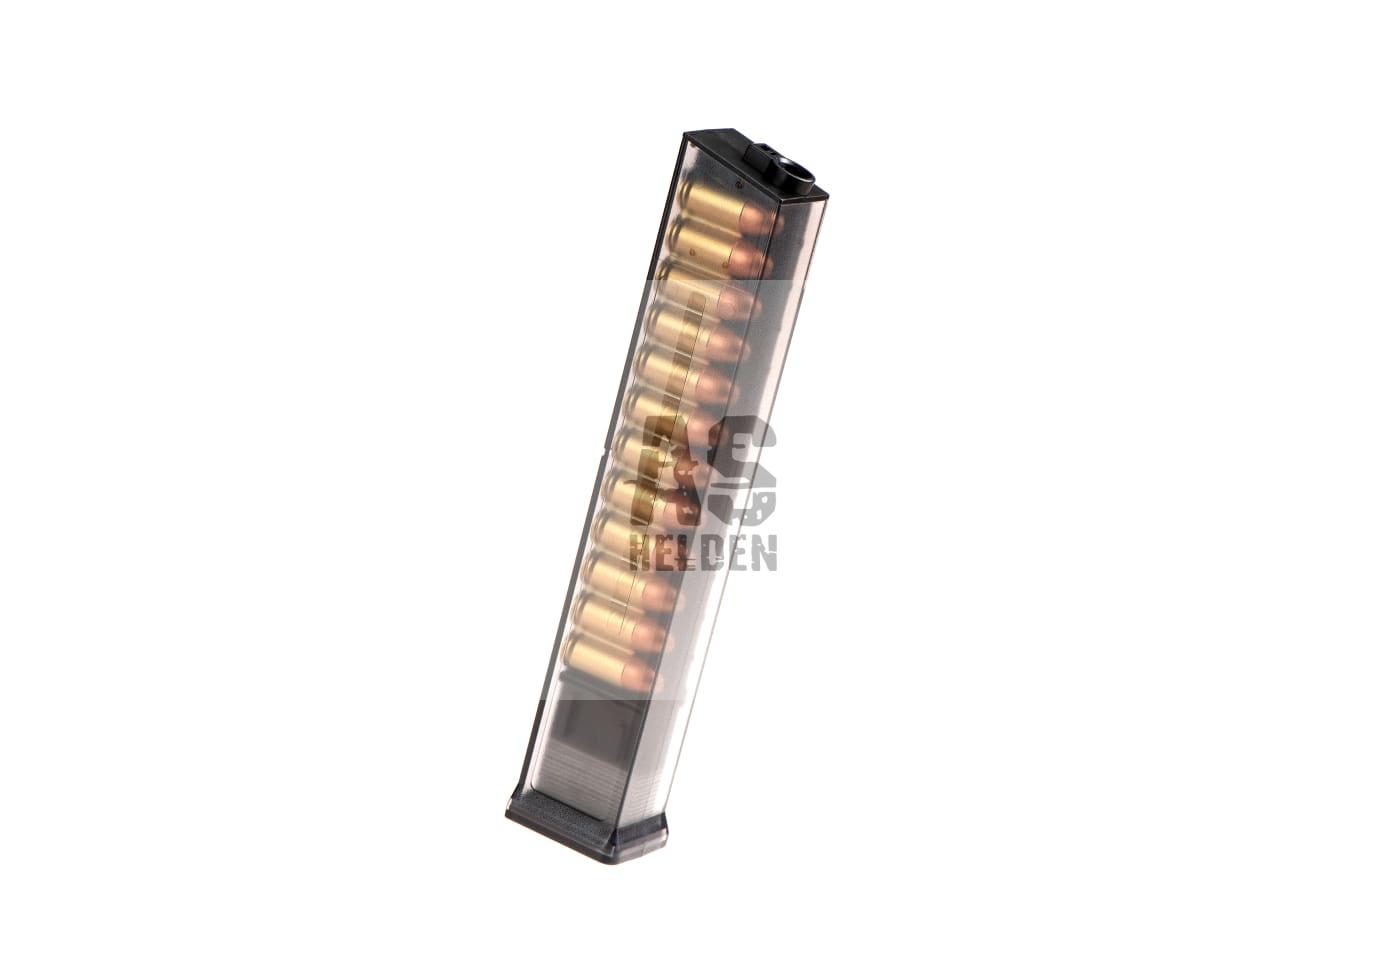 Magazine PCC45 Midcap 110rds with Dummy Rounds - (G&G)